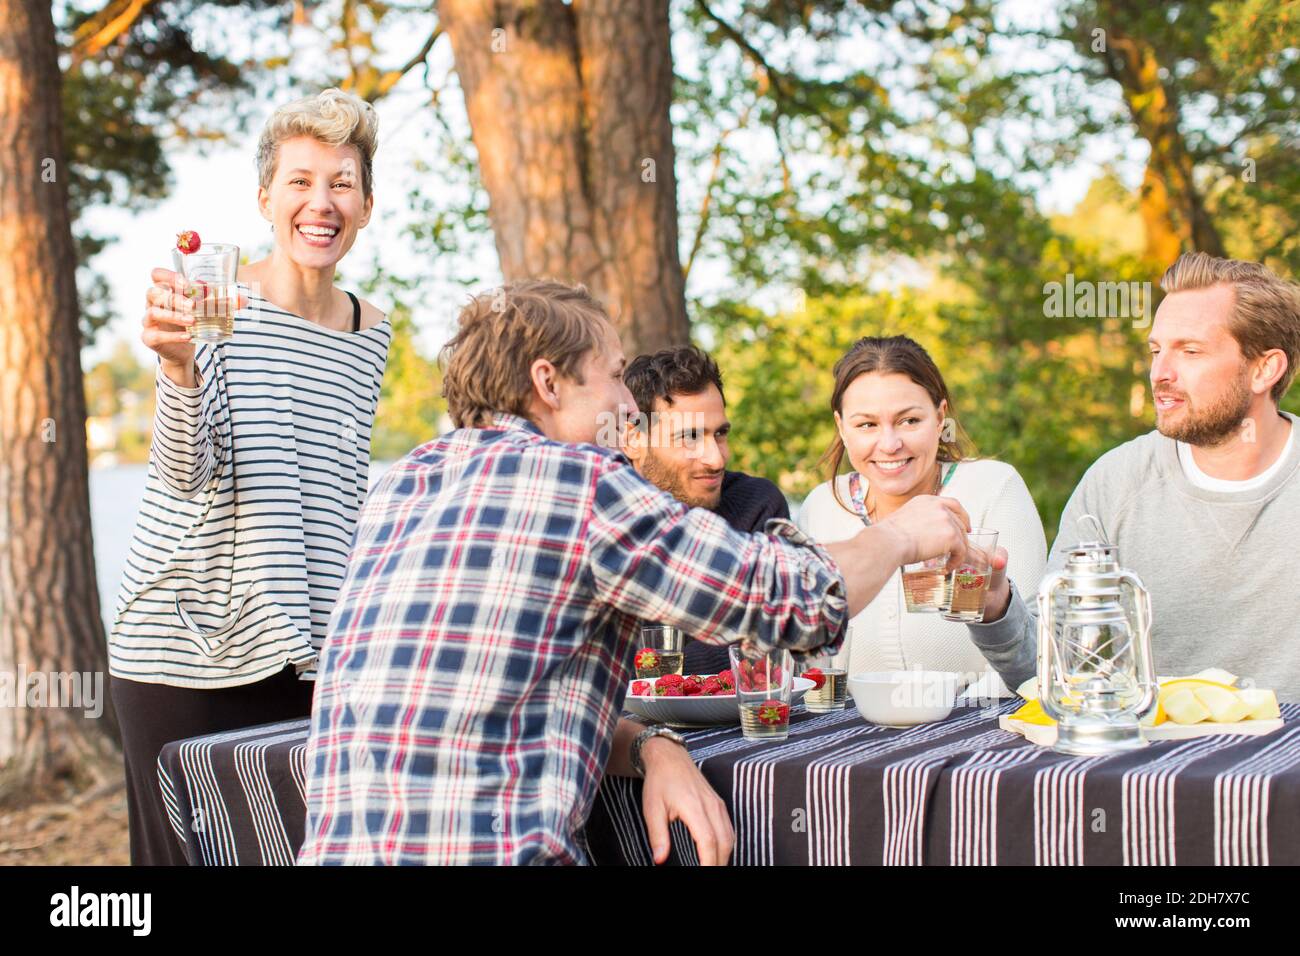 Portrait of happy woman holding beer glass while standing by friends having lunch at picnic table Stock Photo